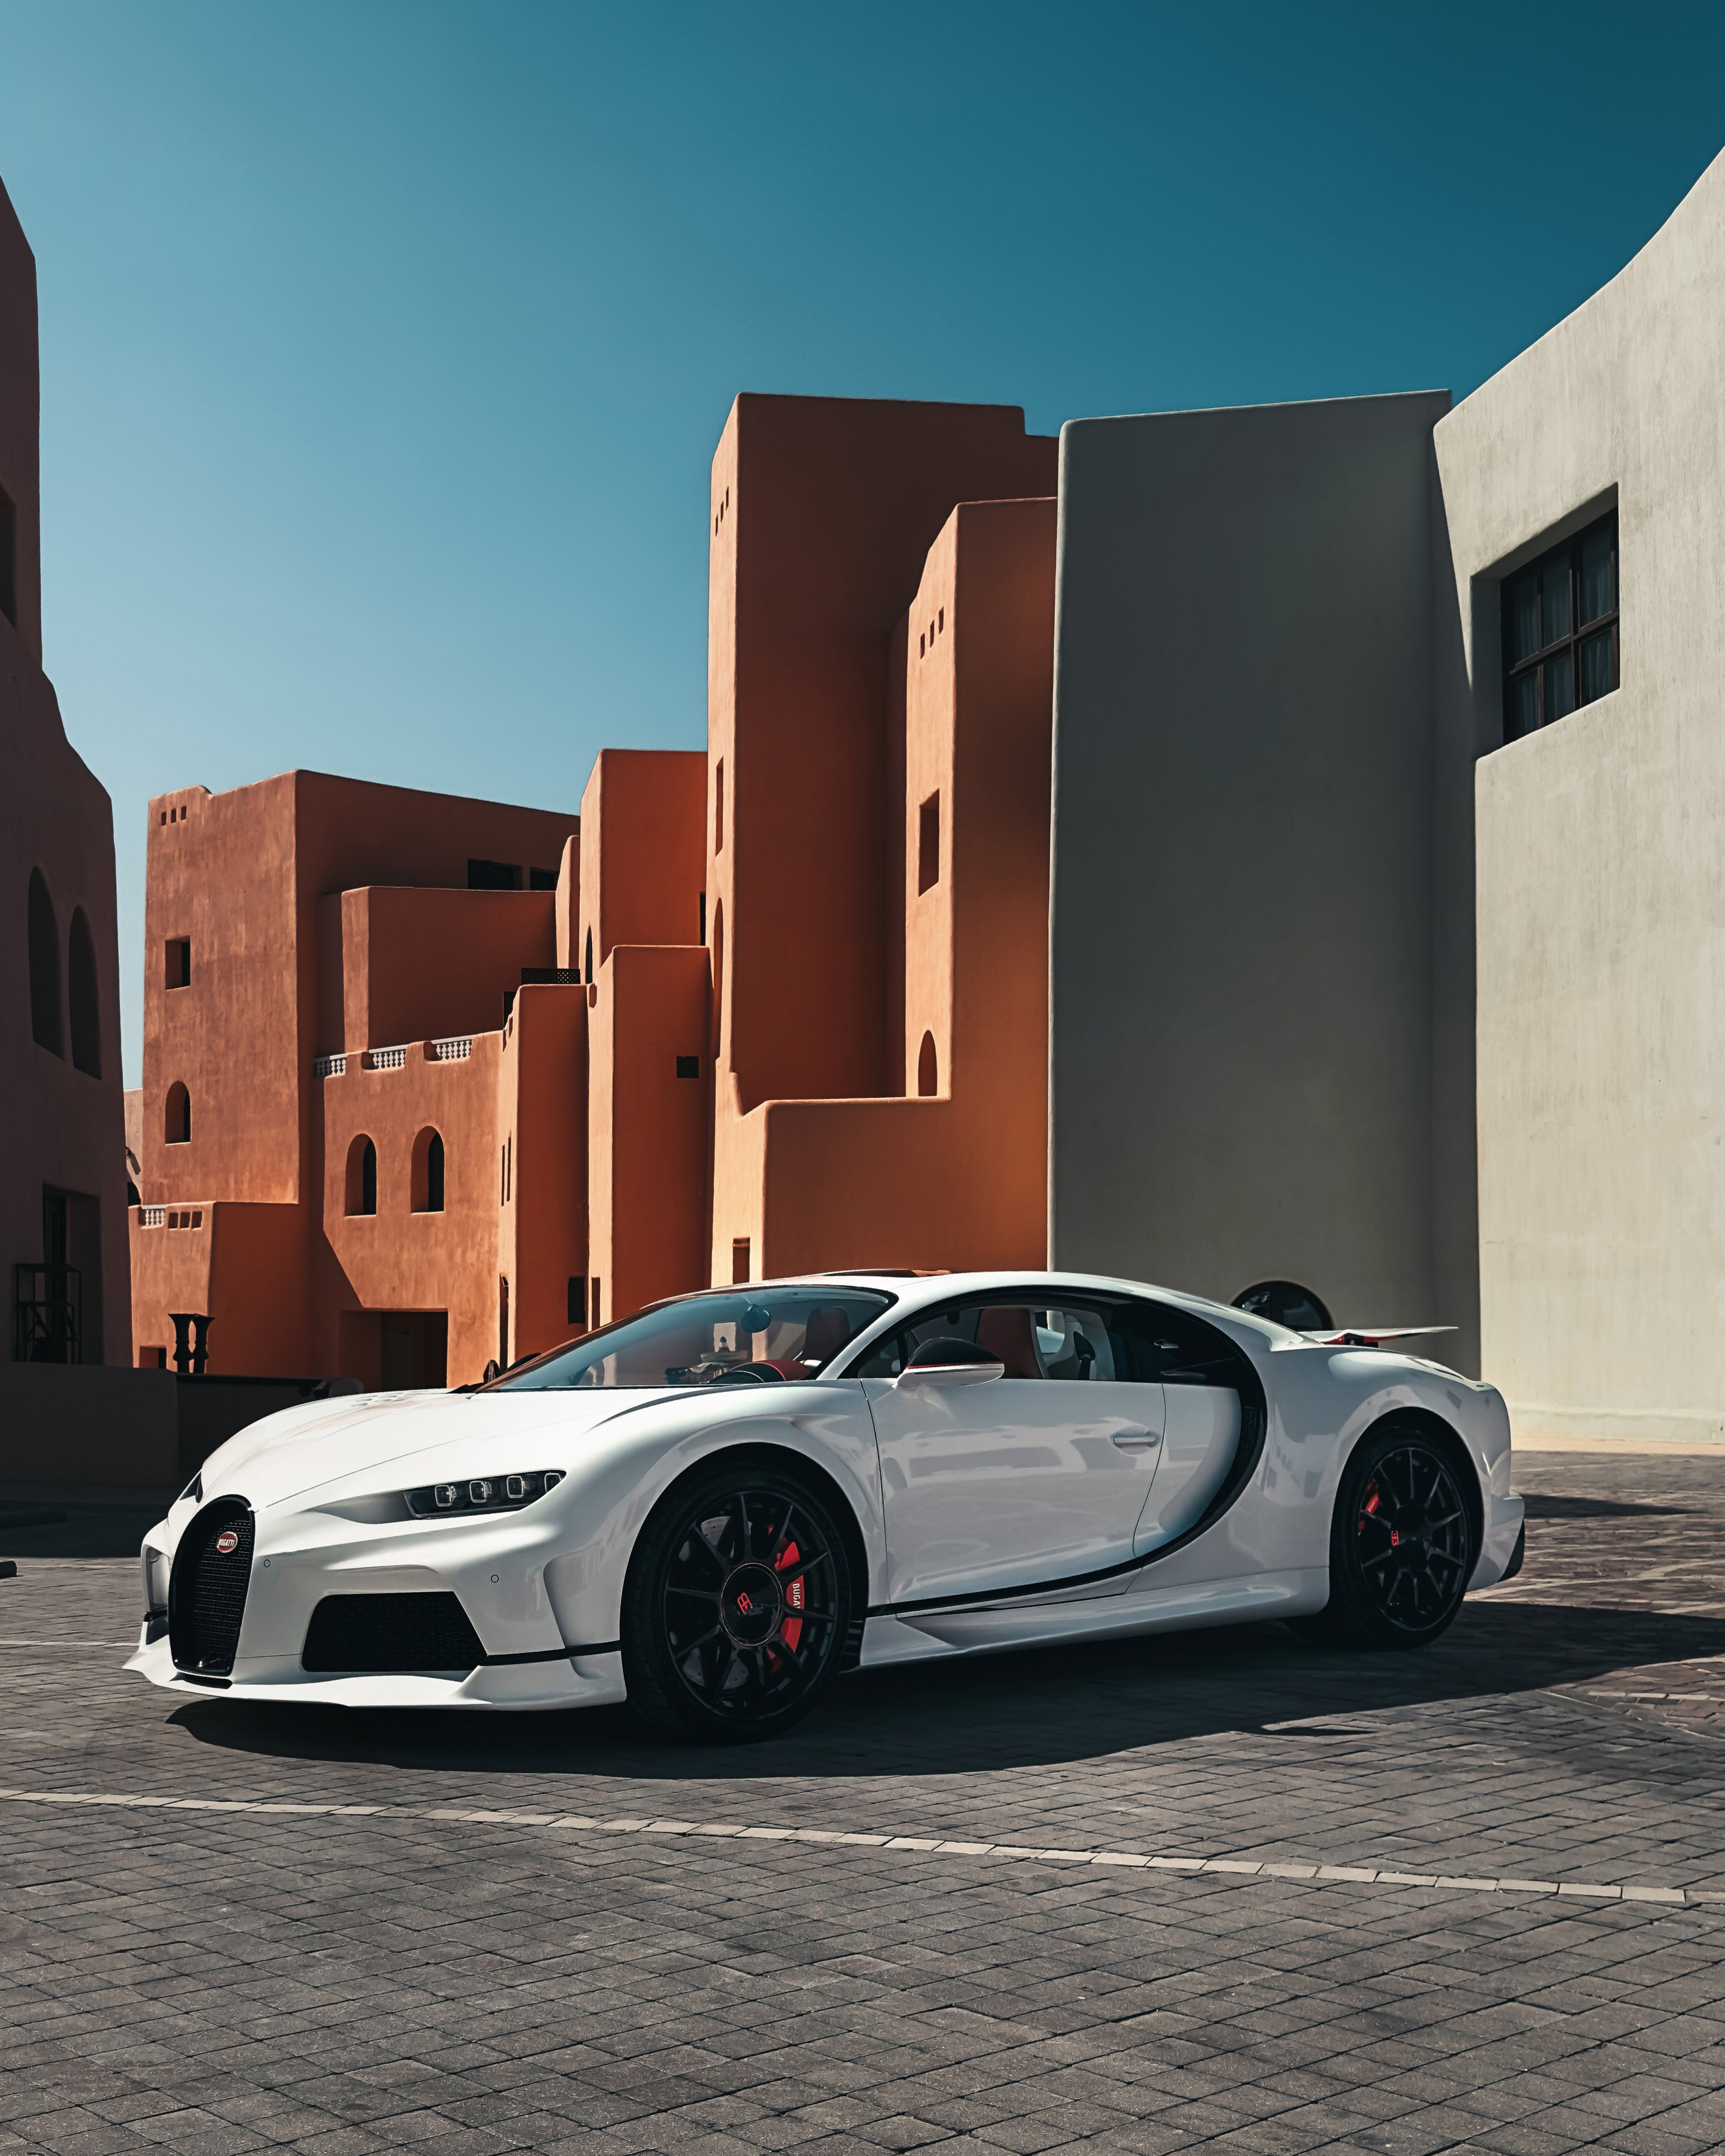 Bugatti Chiron Speed Side View 4K HD Wallpapers  HD Wallpapers  ID 31268